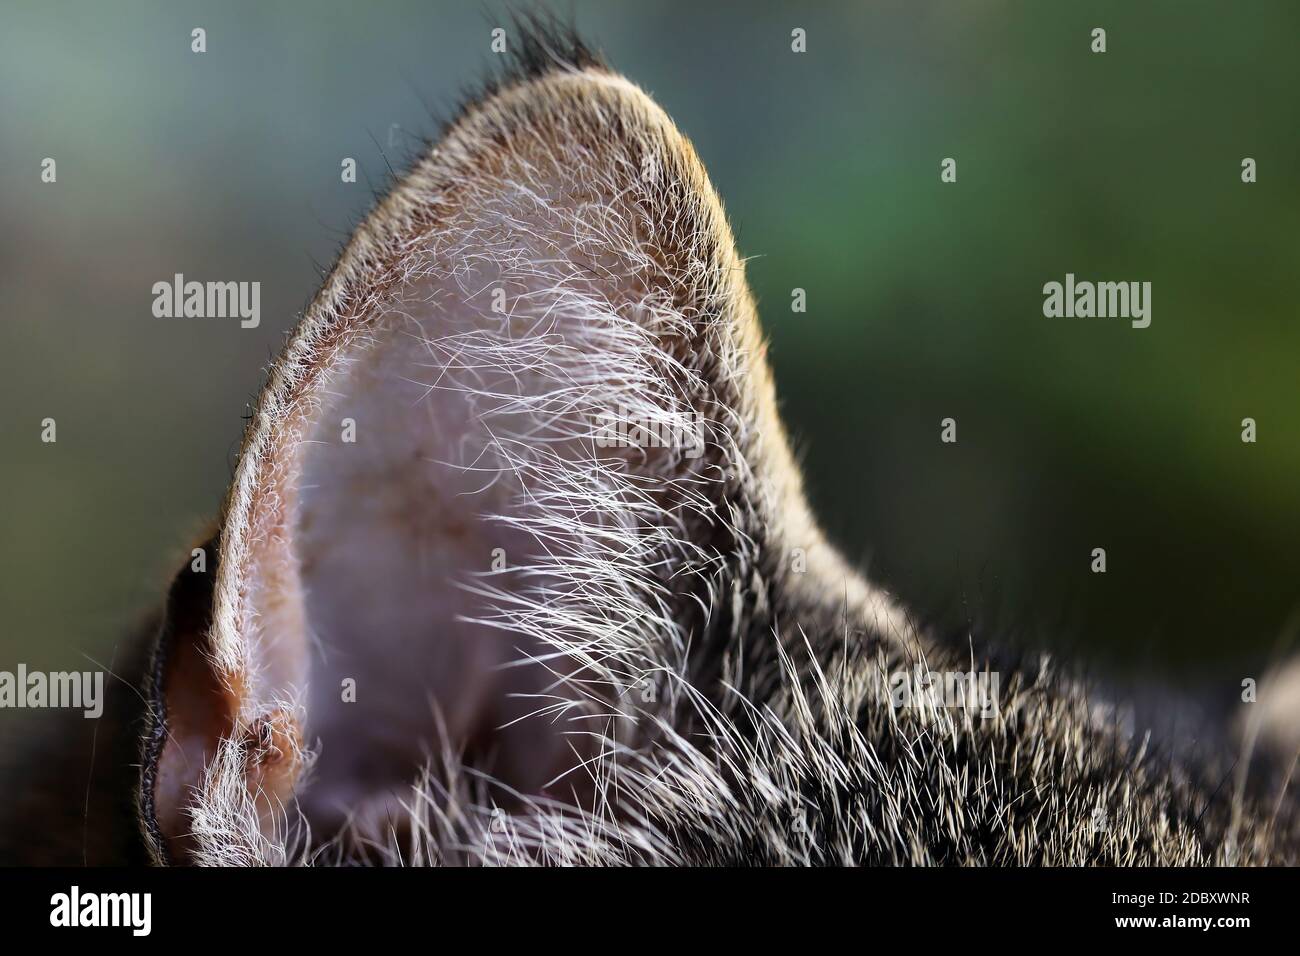 Close up of an ear of a brown-black cat Stock Photo